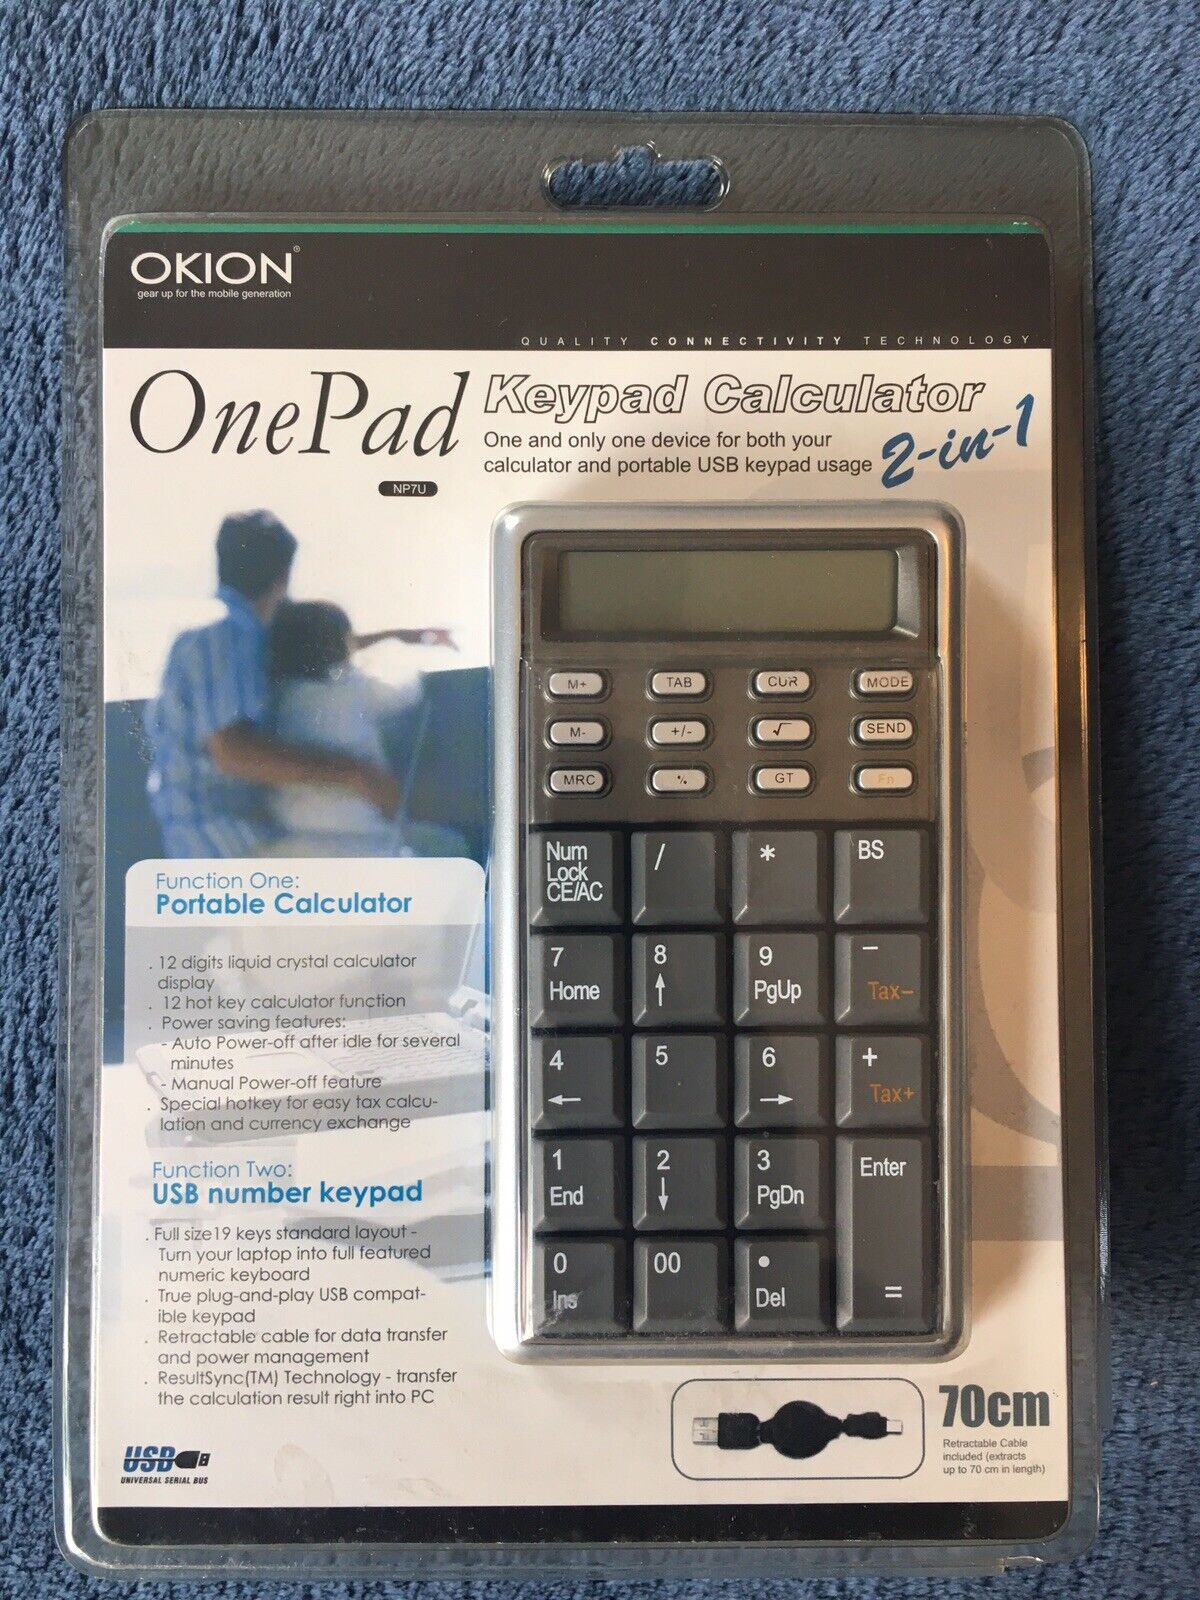 Okion 2 In 1 Keypad Calculator With Retractable USB Cord Brand New Sealed